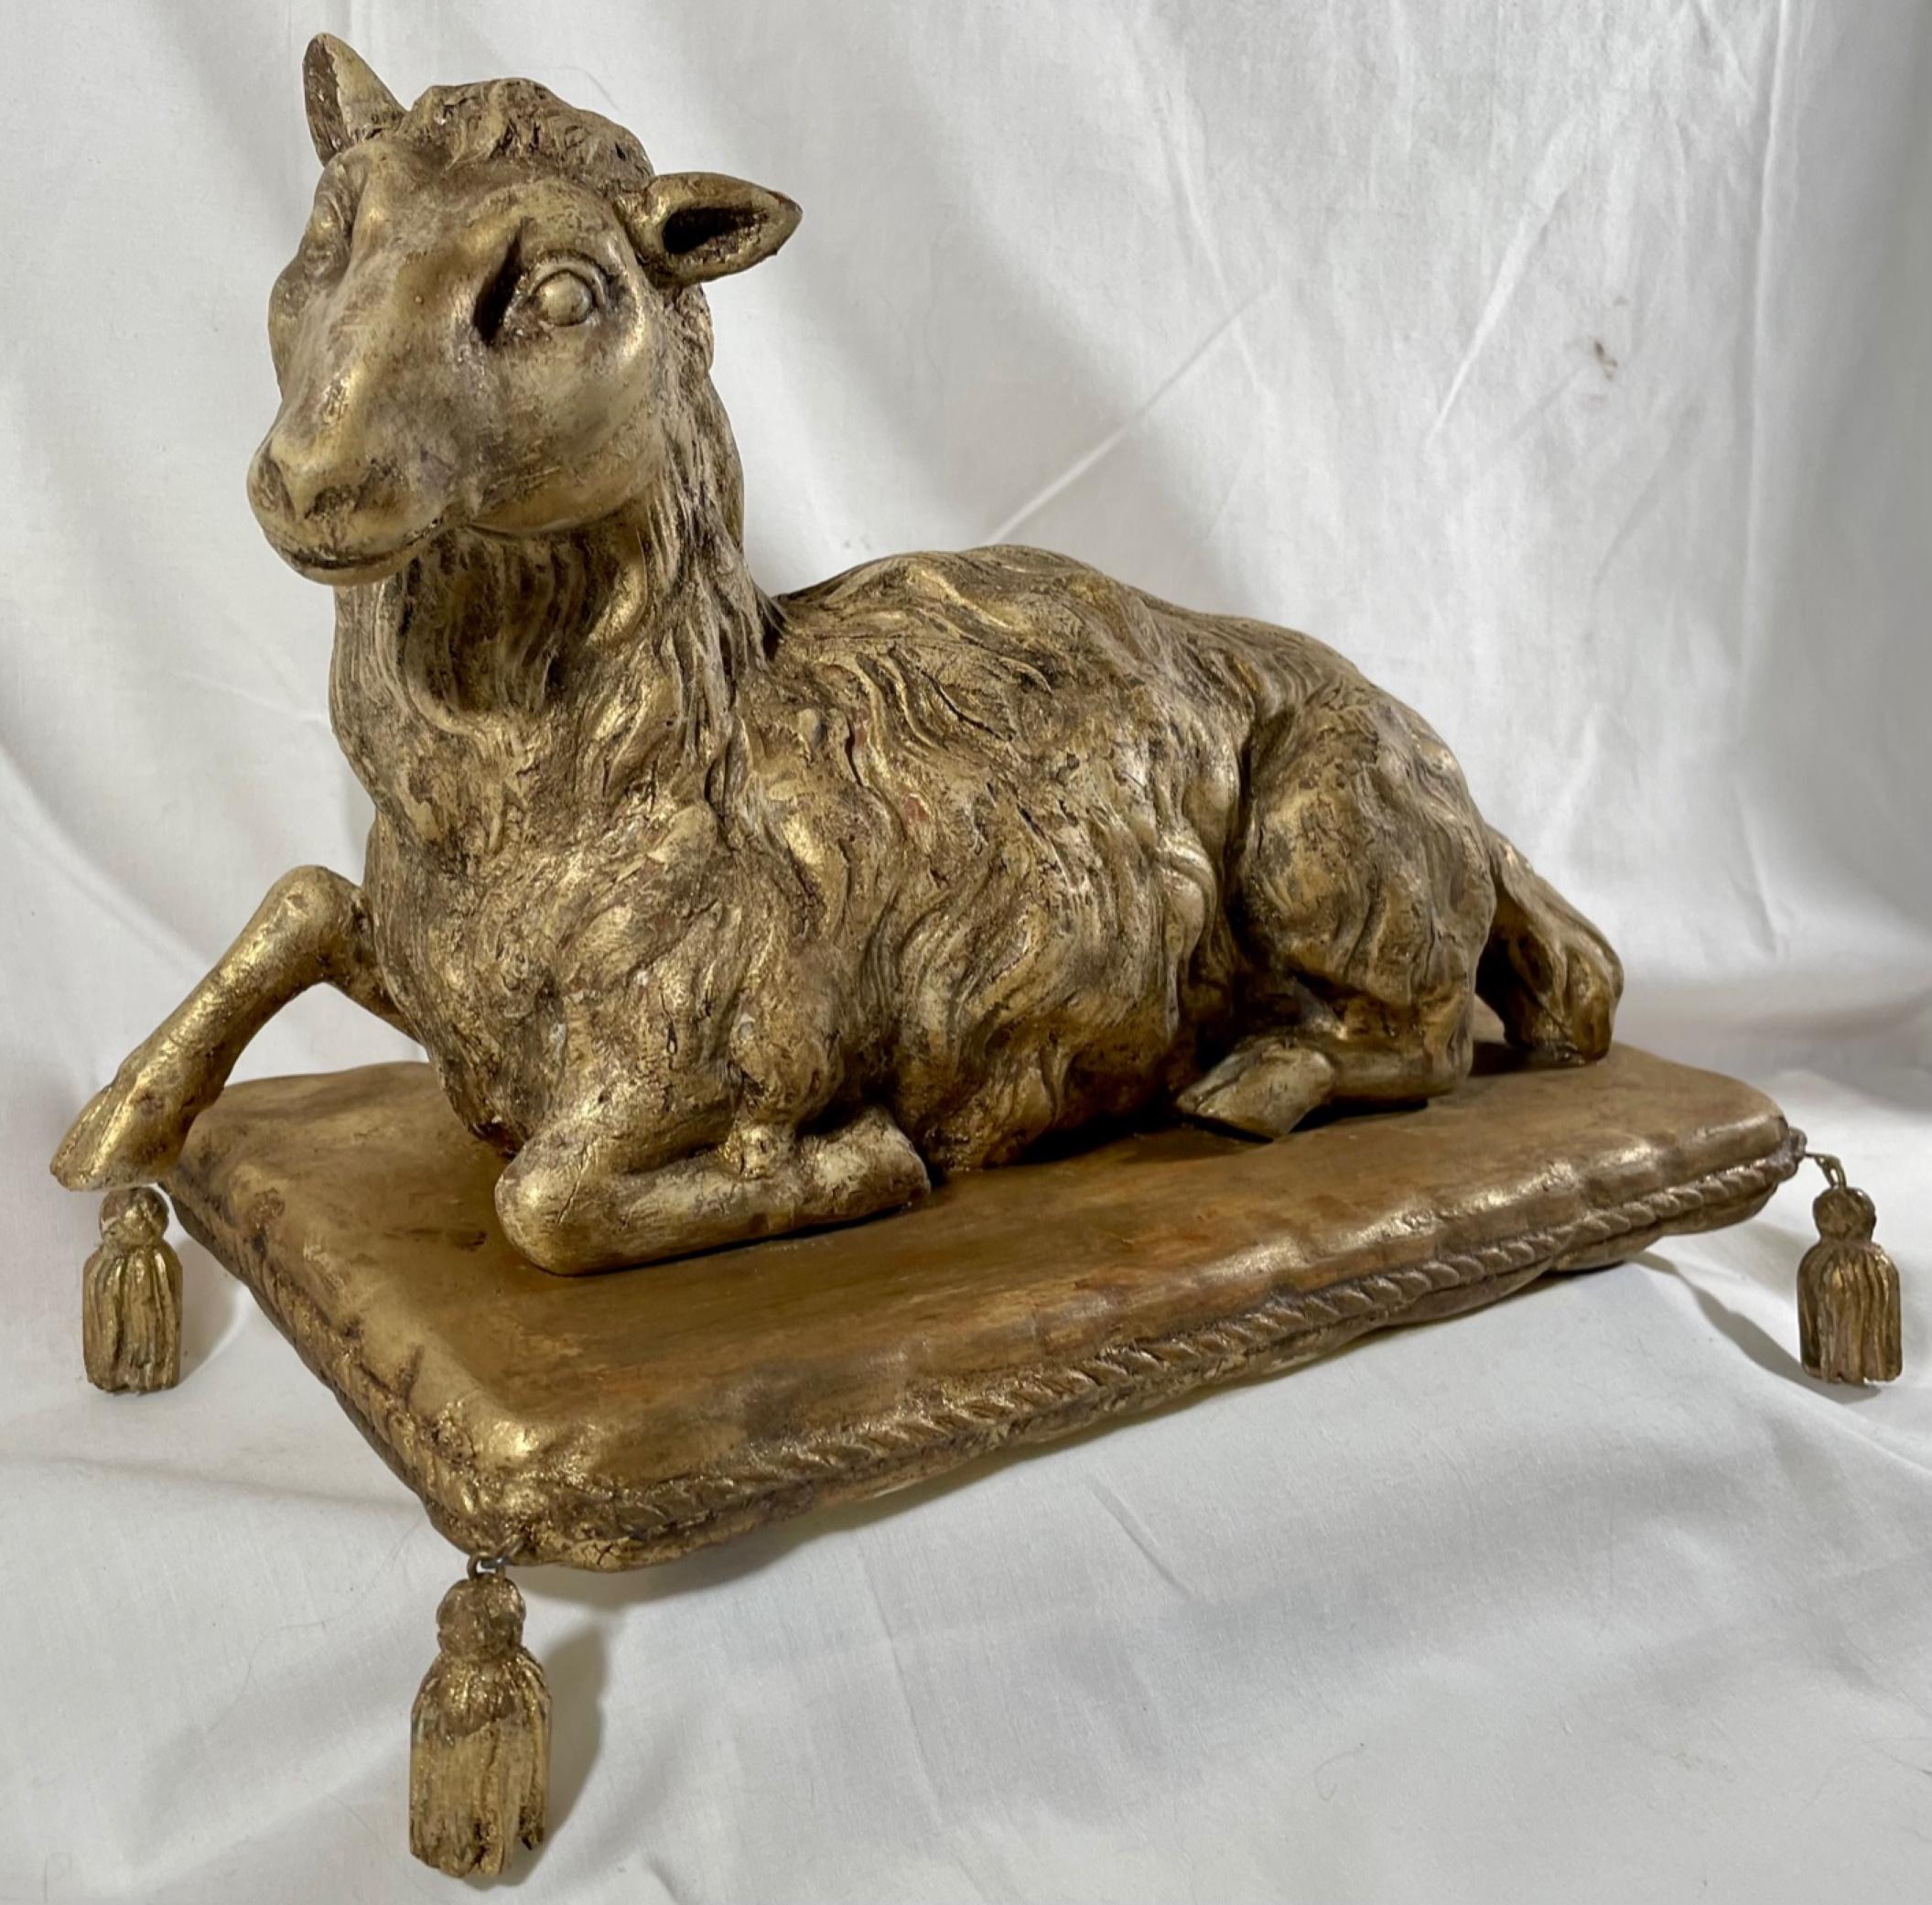 Antique wood carved Agnus Dei paschal lamb on Giltwood Pillow.

Rare antique wood carved Agnus Dei Paschal lamb on giltwood pillow. The beautiful realistically hand carved 19th century gilded wooden lamb is of perfect proportions and in a recumbent